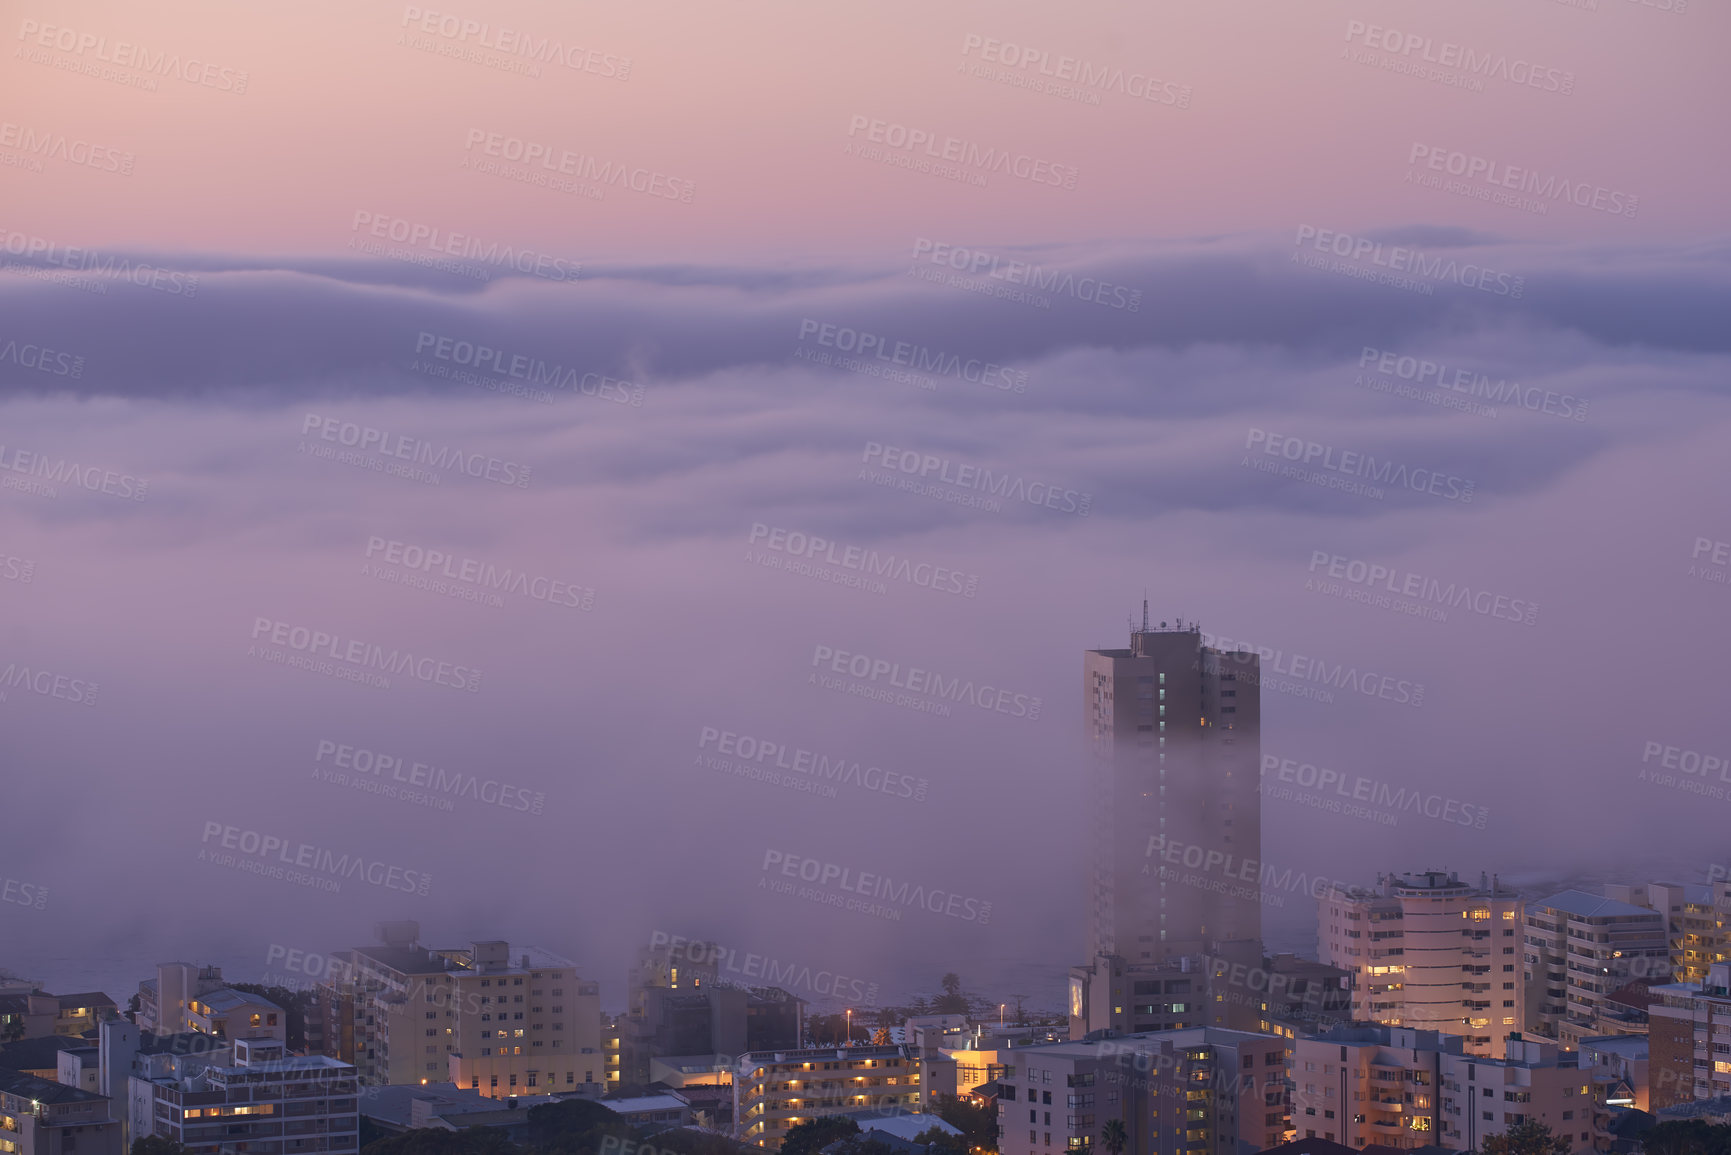 Buy stock photo Panoramic view of clouds covering buildings at sunset in the popular city of Cape Town, South Africa with copy space. A peaceful, misty sunrise over signal hill. Landscape of a modern town at night